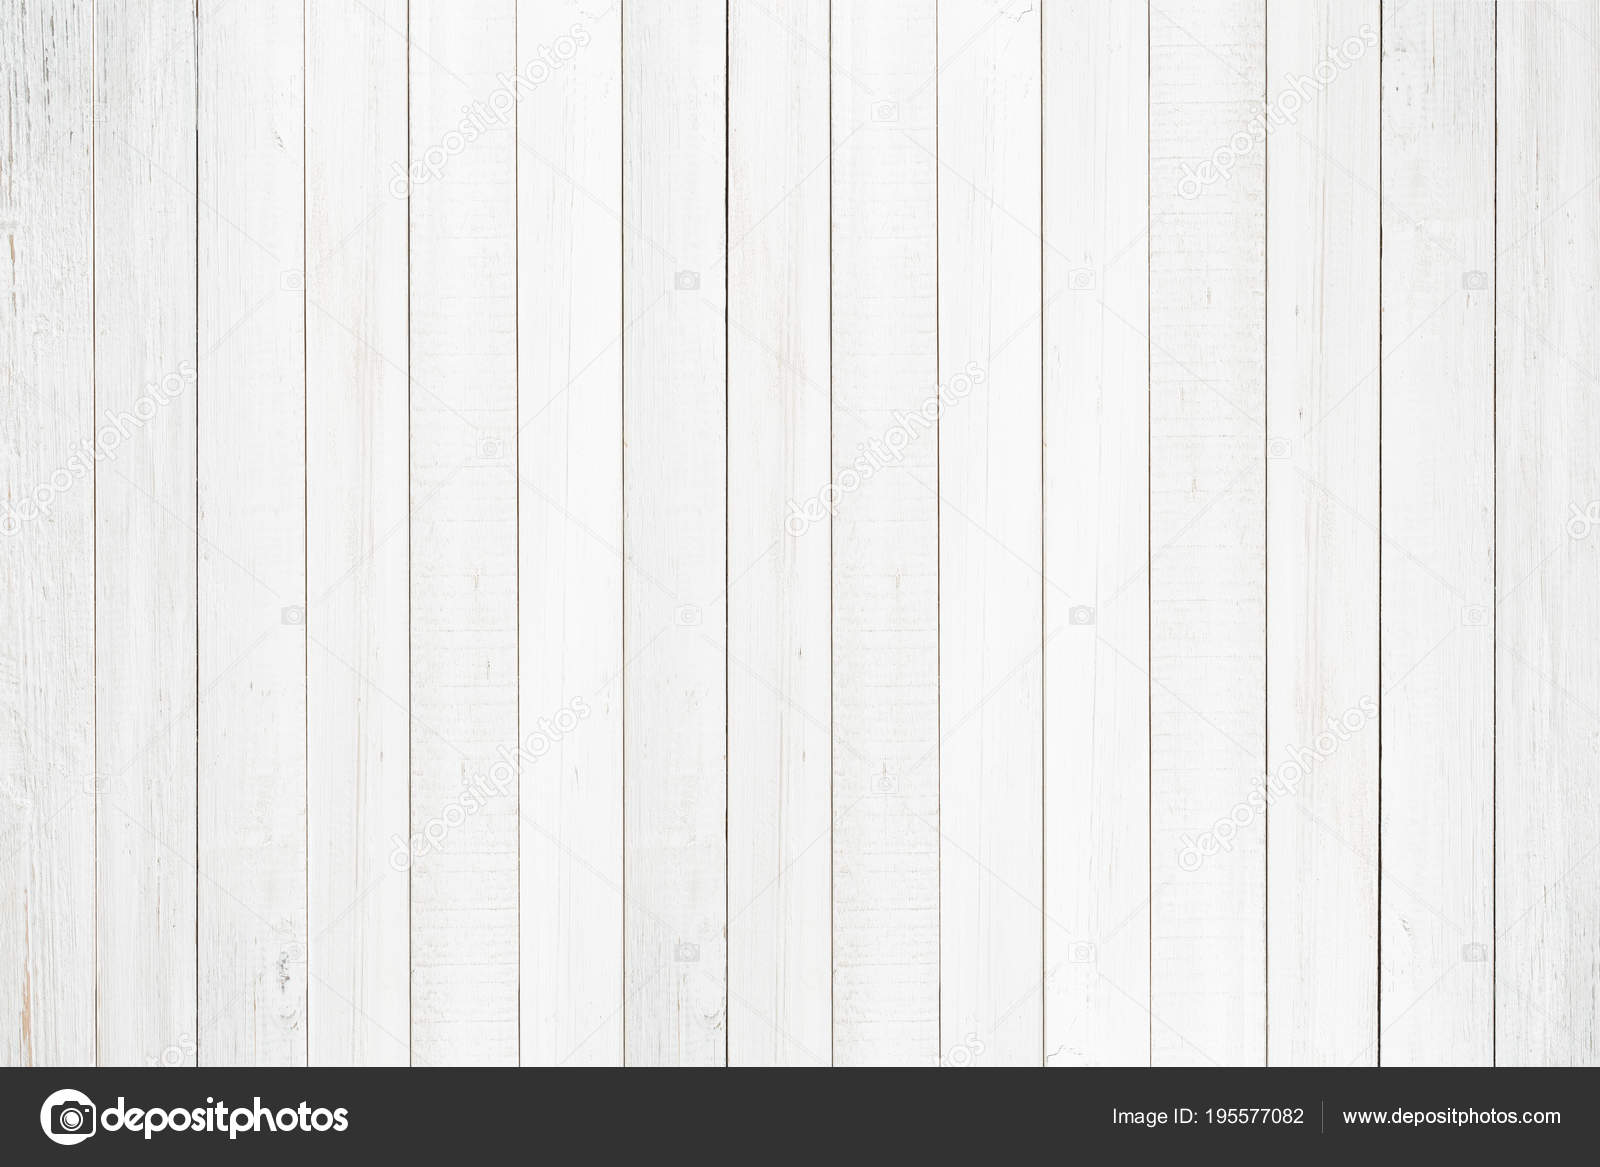 White Natural Wood Wall Texture And Background Empty Surface White Wooden For Design Stock Photo Image By C Sorrapongs